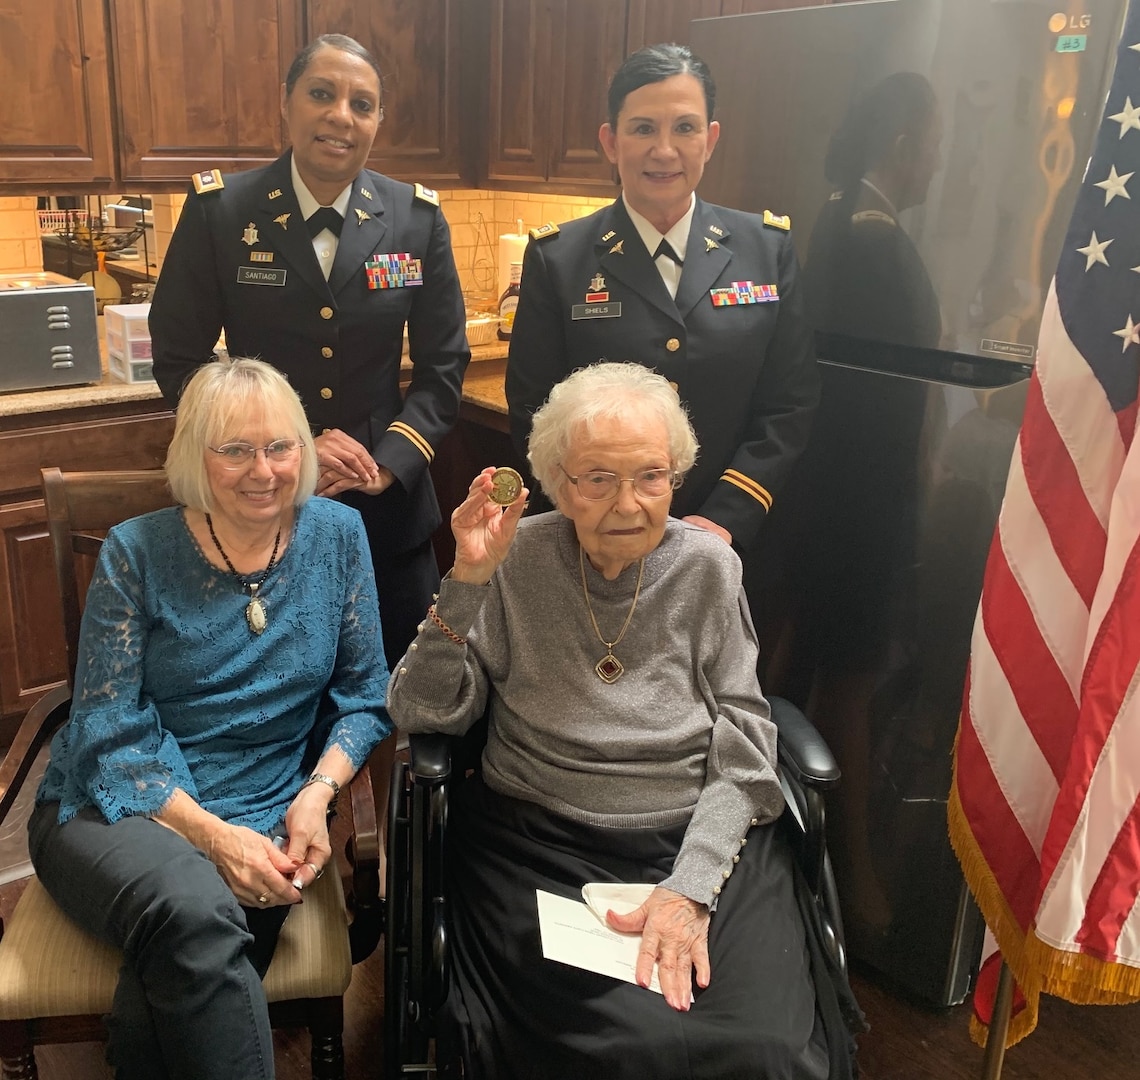 Freda Haworth Coate (front row, right) holds the Army Nurse Corps Association coin given to her by Lt. Col. Karen Santiago (back row, left) and Lt. Col. Teresa Shiels, both with the 228 Combat Support Hospital in San Antonio. The coin was given to Coate during her 100th birthday celebration Nov. 20 in Leander, Texas. Coate served in the U.S. Army Nurse Corps in World War II in the South Pacific from 1943-45.